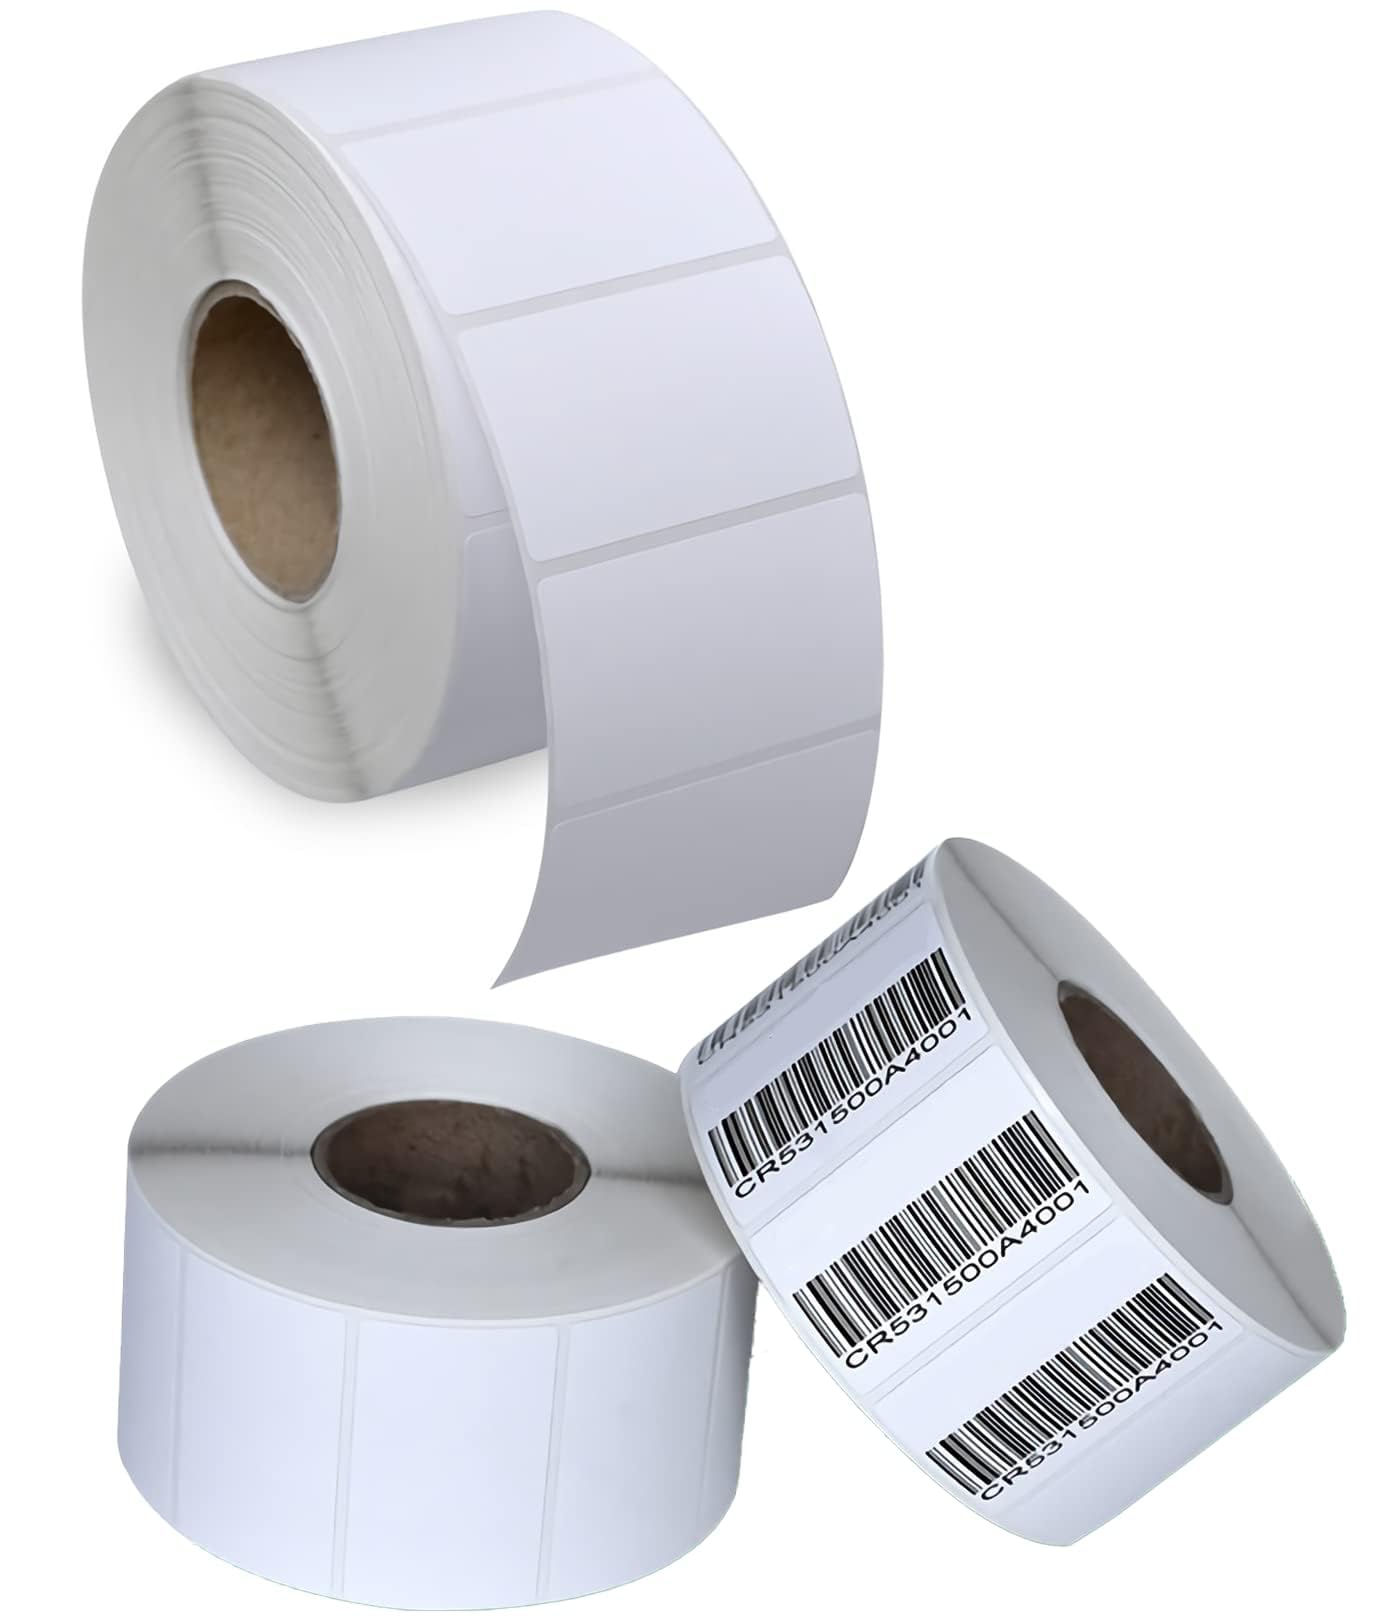 2"x1.25" Thermal Shipping Labels, Barcode Labels Sticker, Blank Label Paper, Compatible with Neatoscan and Zebra Printers (50mm x 30mm,1500 Per Roll) (1 Roll - 1500 labels)